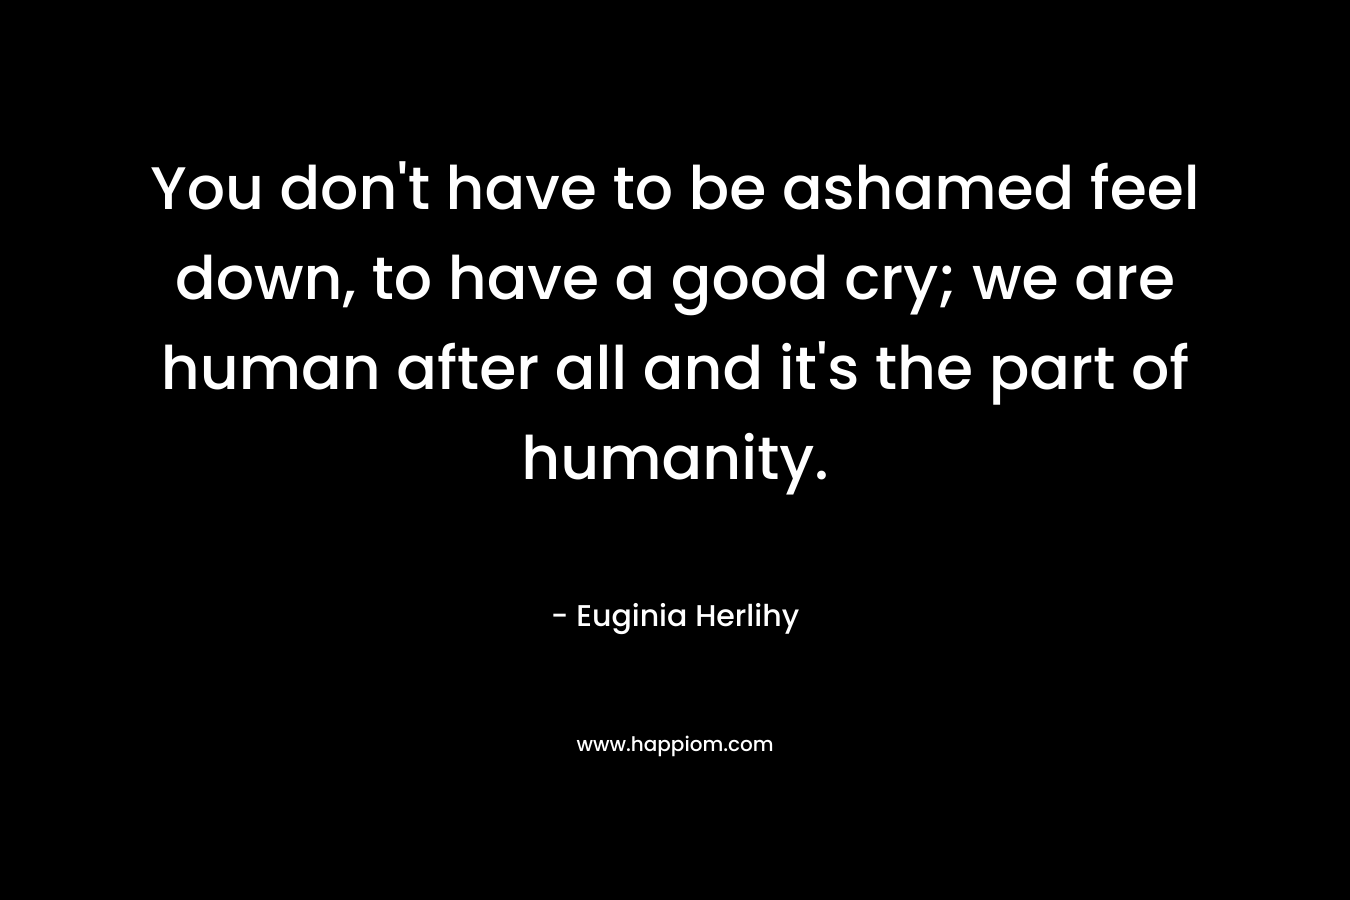 You don’t have to be ashamed feel down, to have a good cry; we are human after all and it’s the part of humanity. – Euginia Herlihy